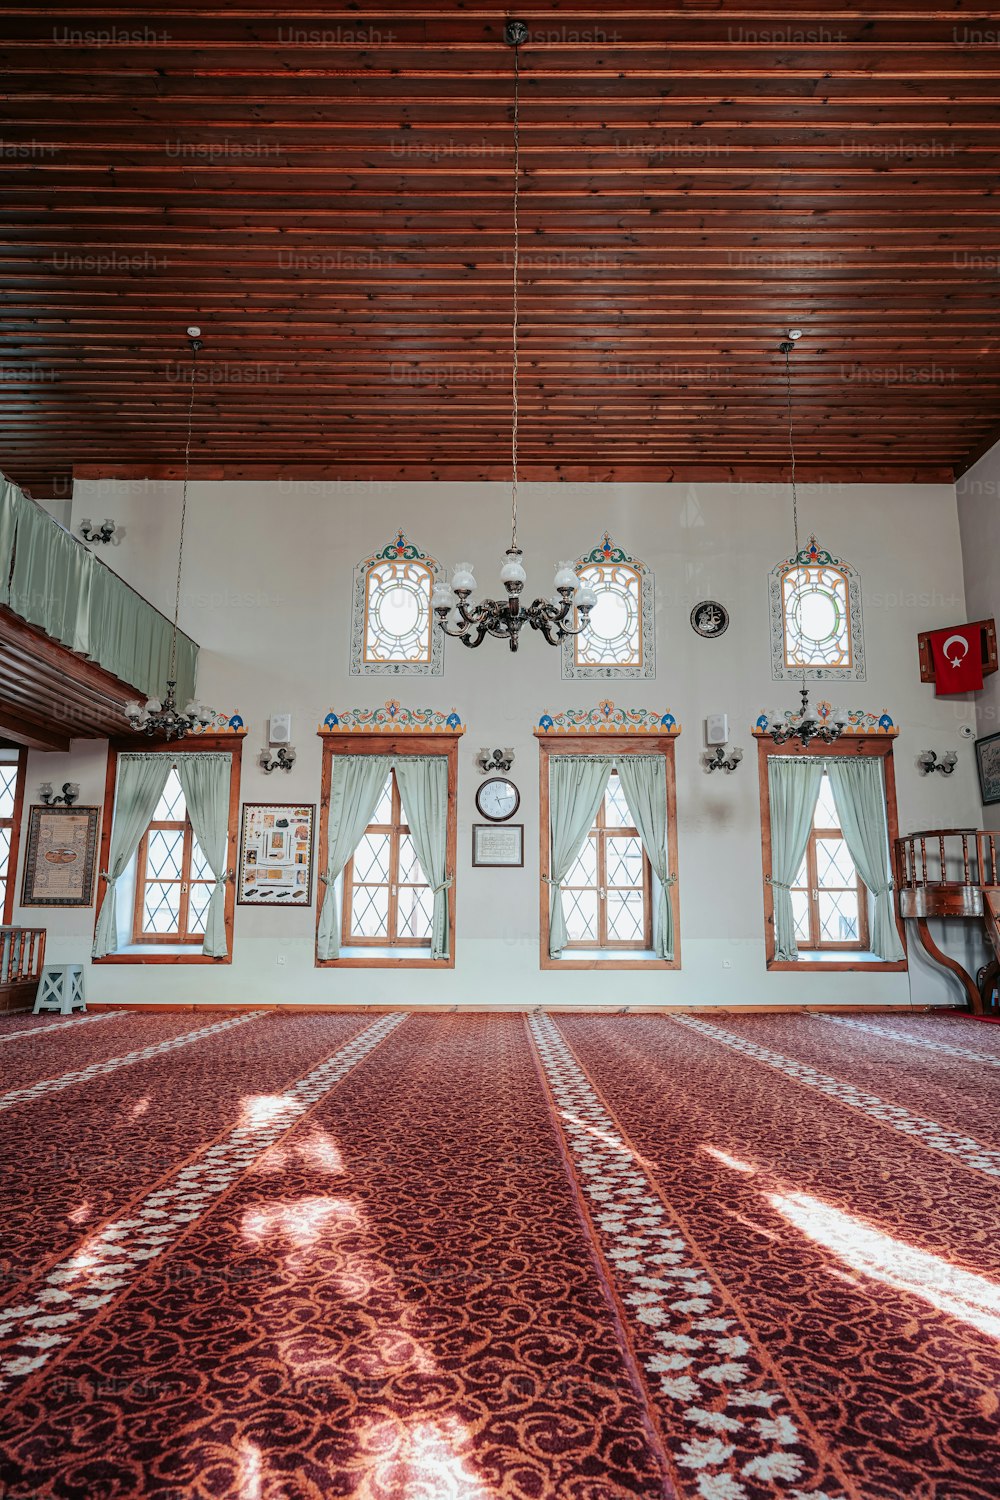 a large room with several windows and a rug on the floor